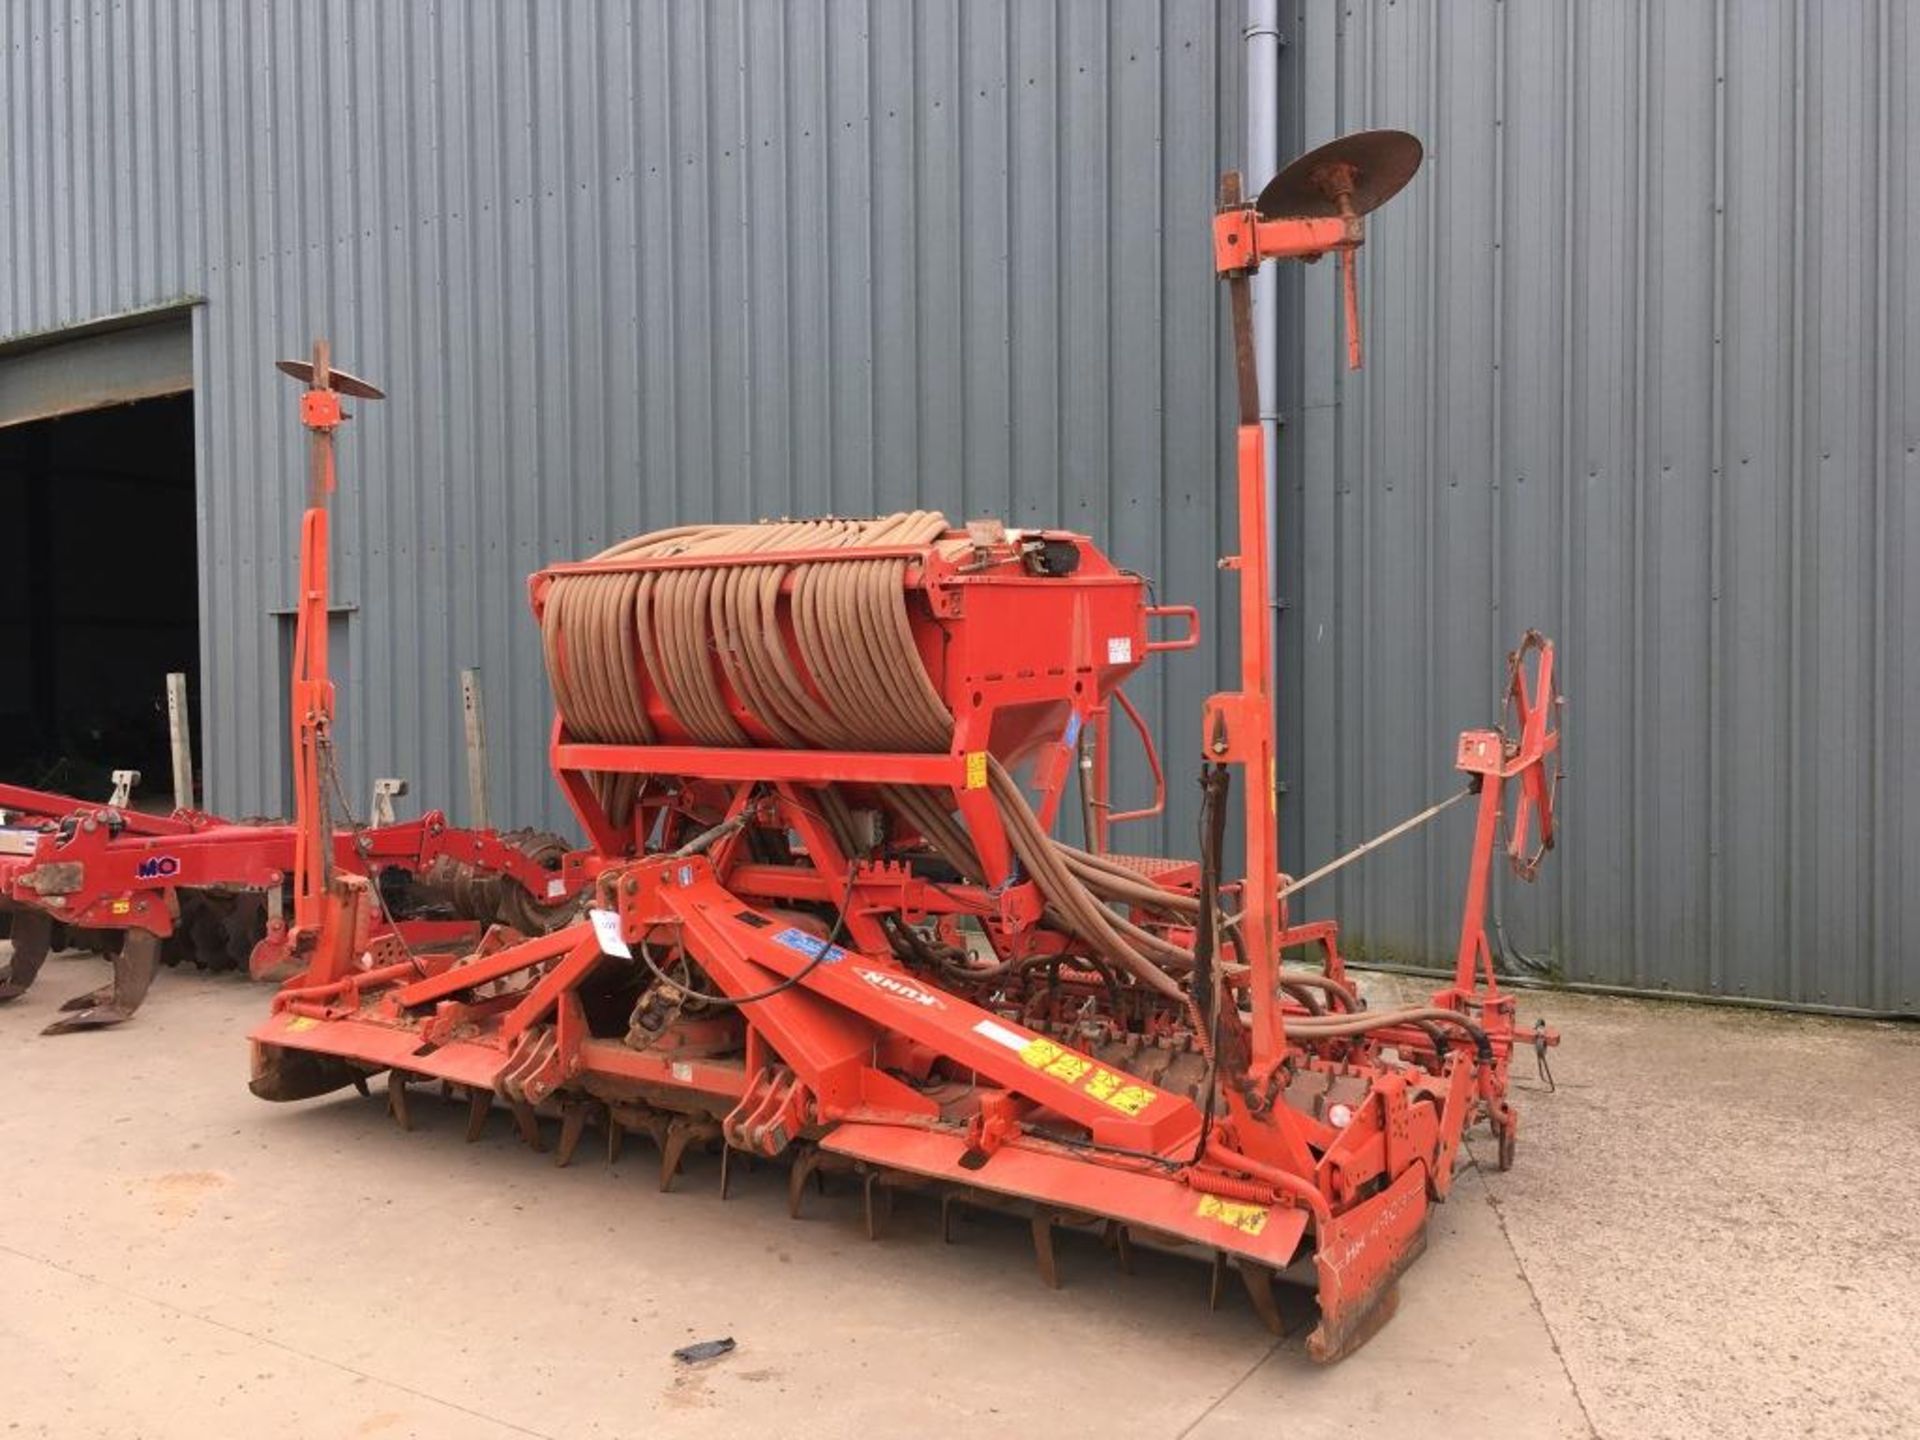 Kuhn HR 4003D 14' power harrow, serial number: A4631 (2002) with Kuhn Venta LC 402 seed drill, - Image 2 of 15